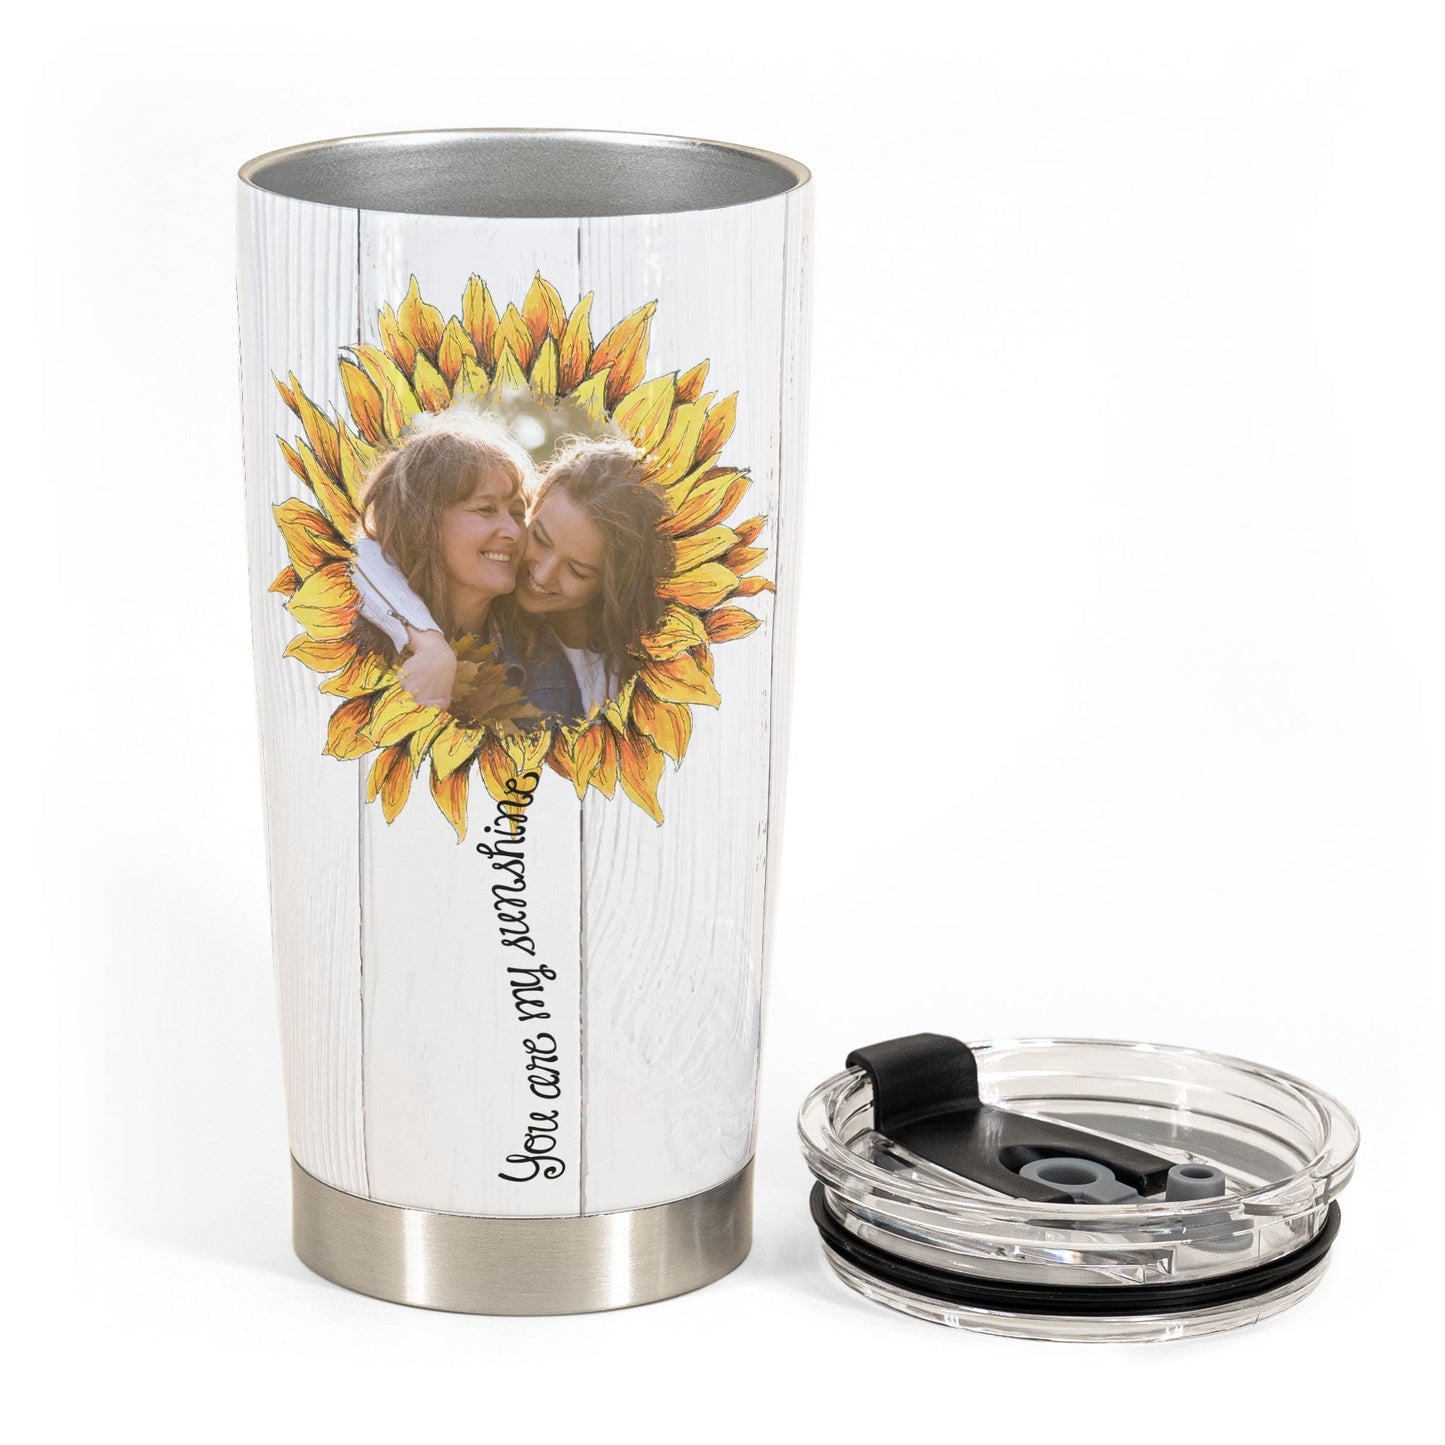 Daughter - Be A Sunflower - Personalized Tumbler Cup - Birthday, Loving Gift For Your Baby, Your Daughter